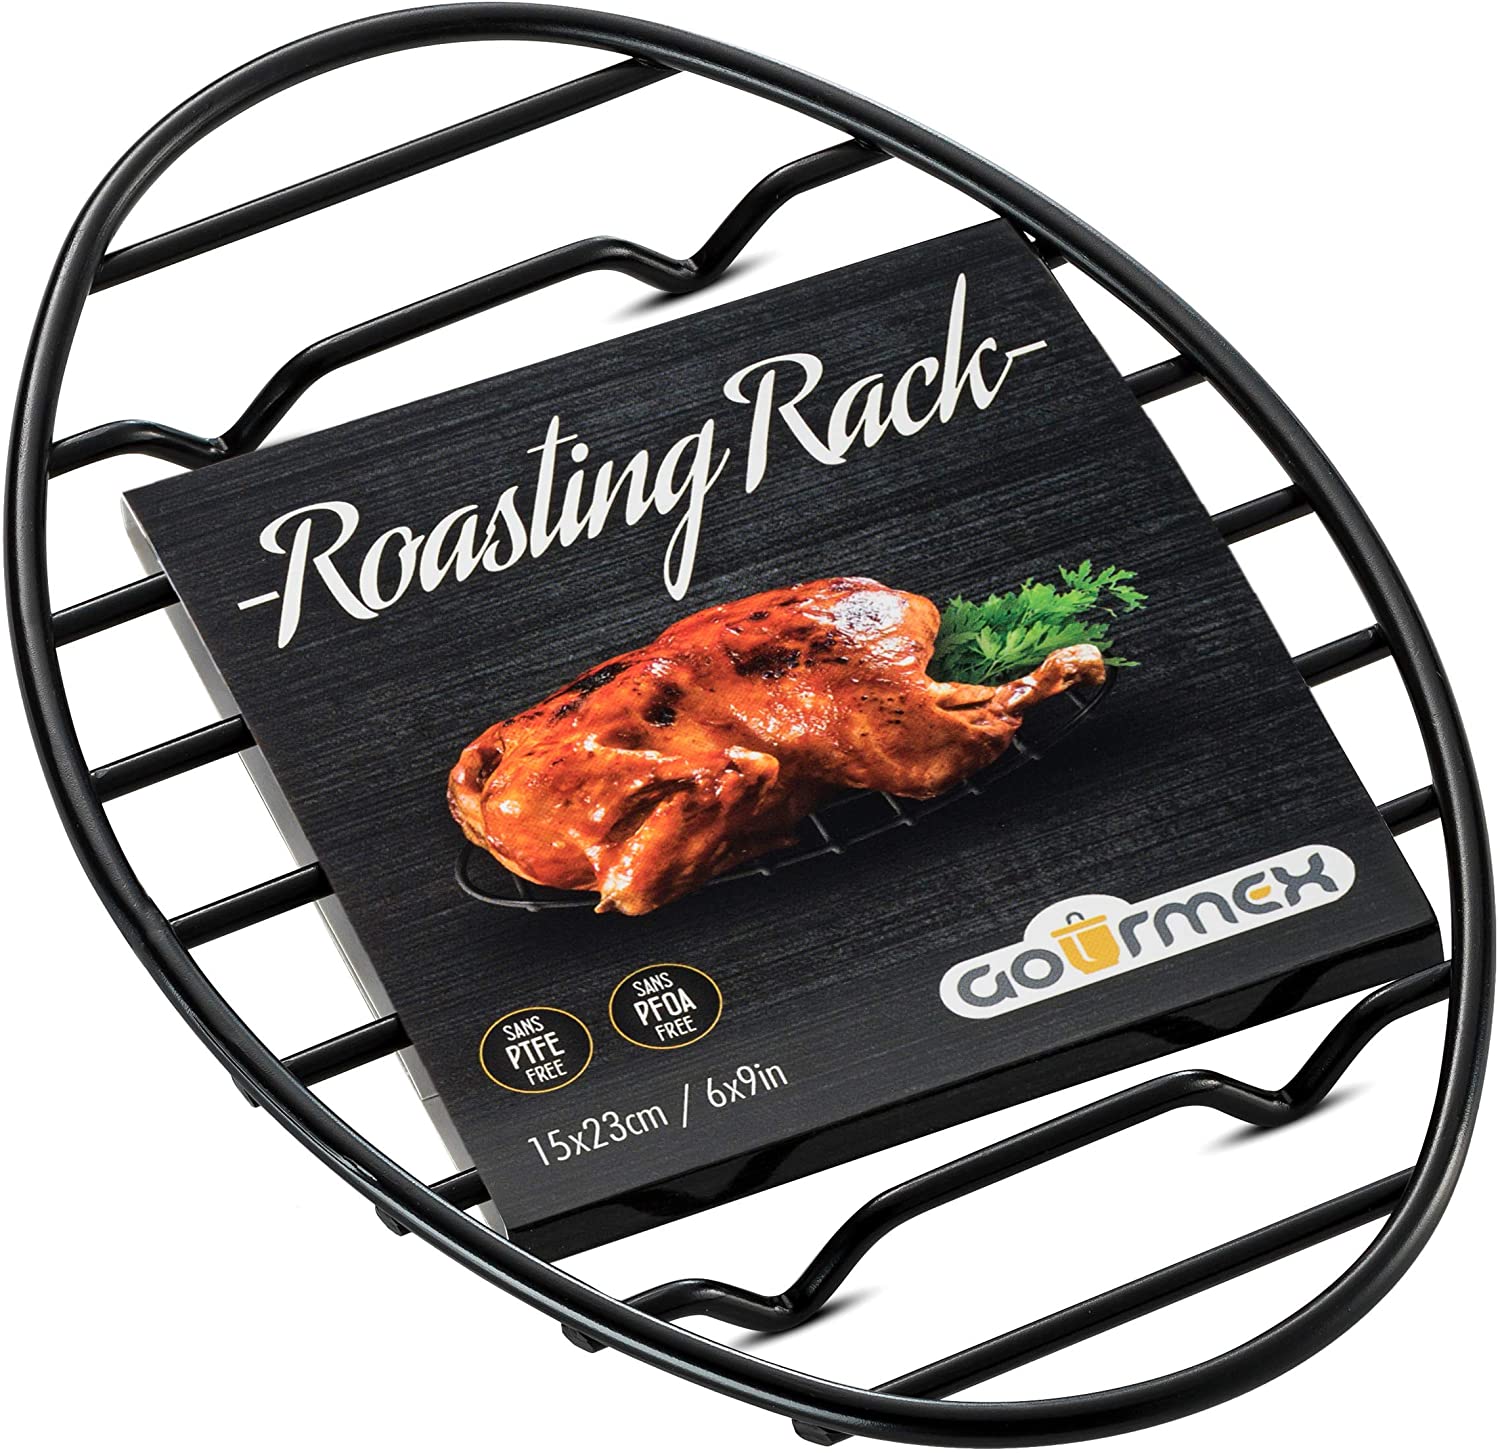 Oval Roasting Rack With Integrated Feet, Black - Non-stick Whitford Coating 6x9"